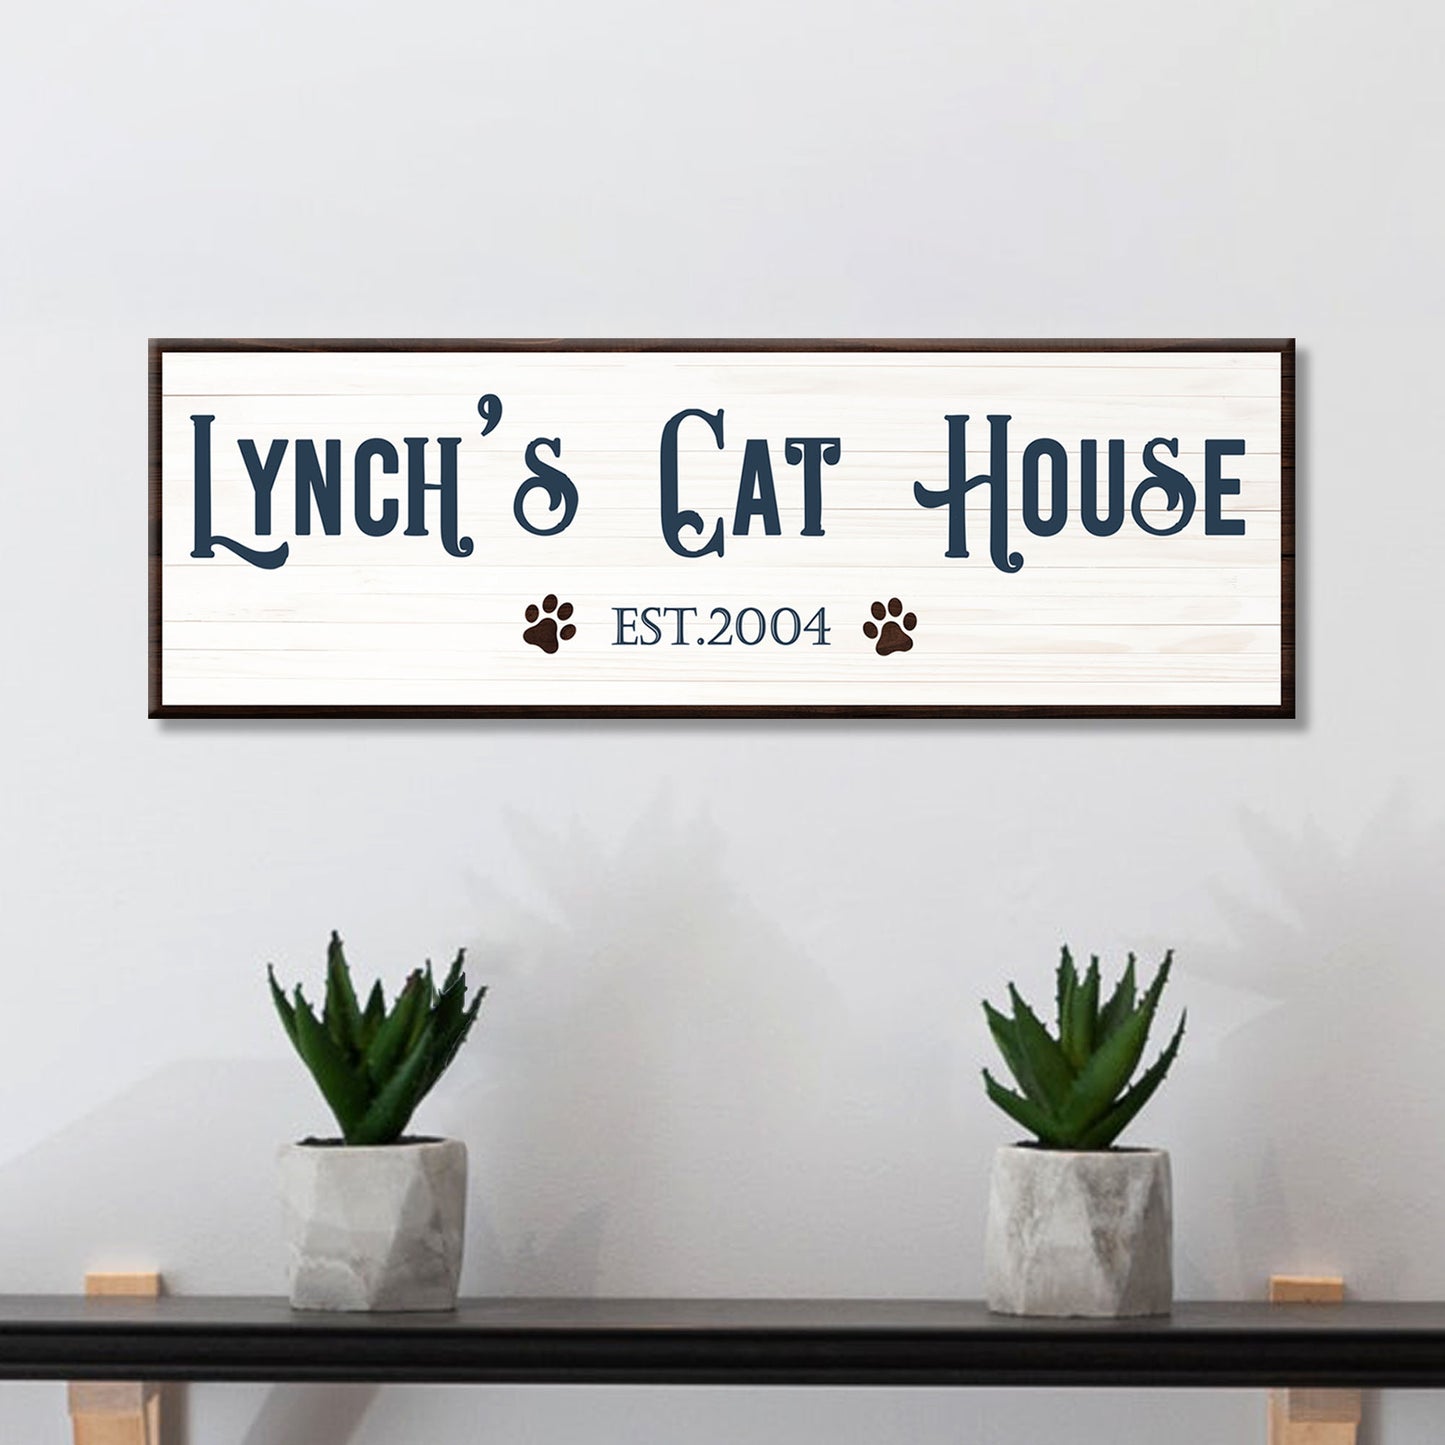 Cat House Sign - Image by Tailored Canvases